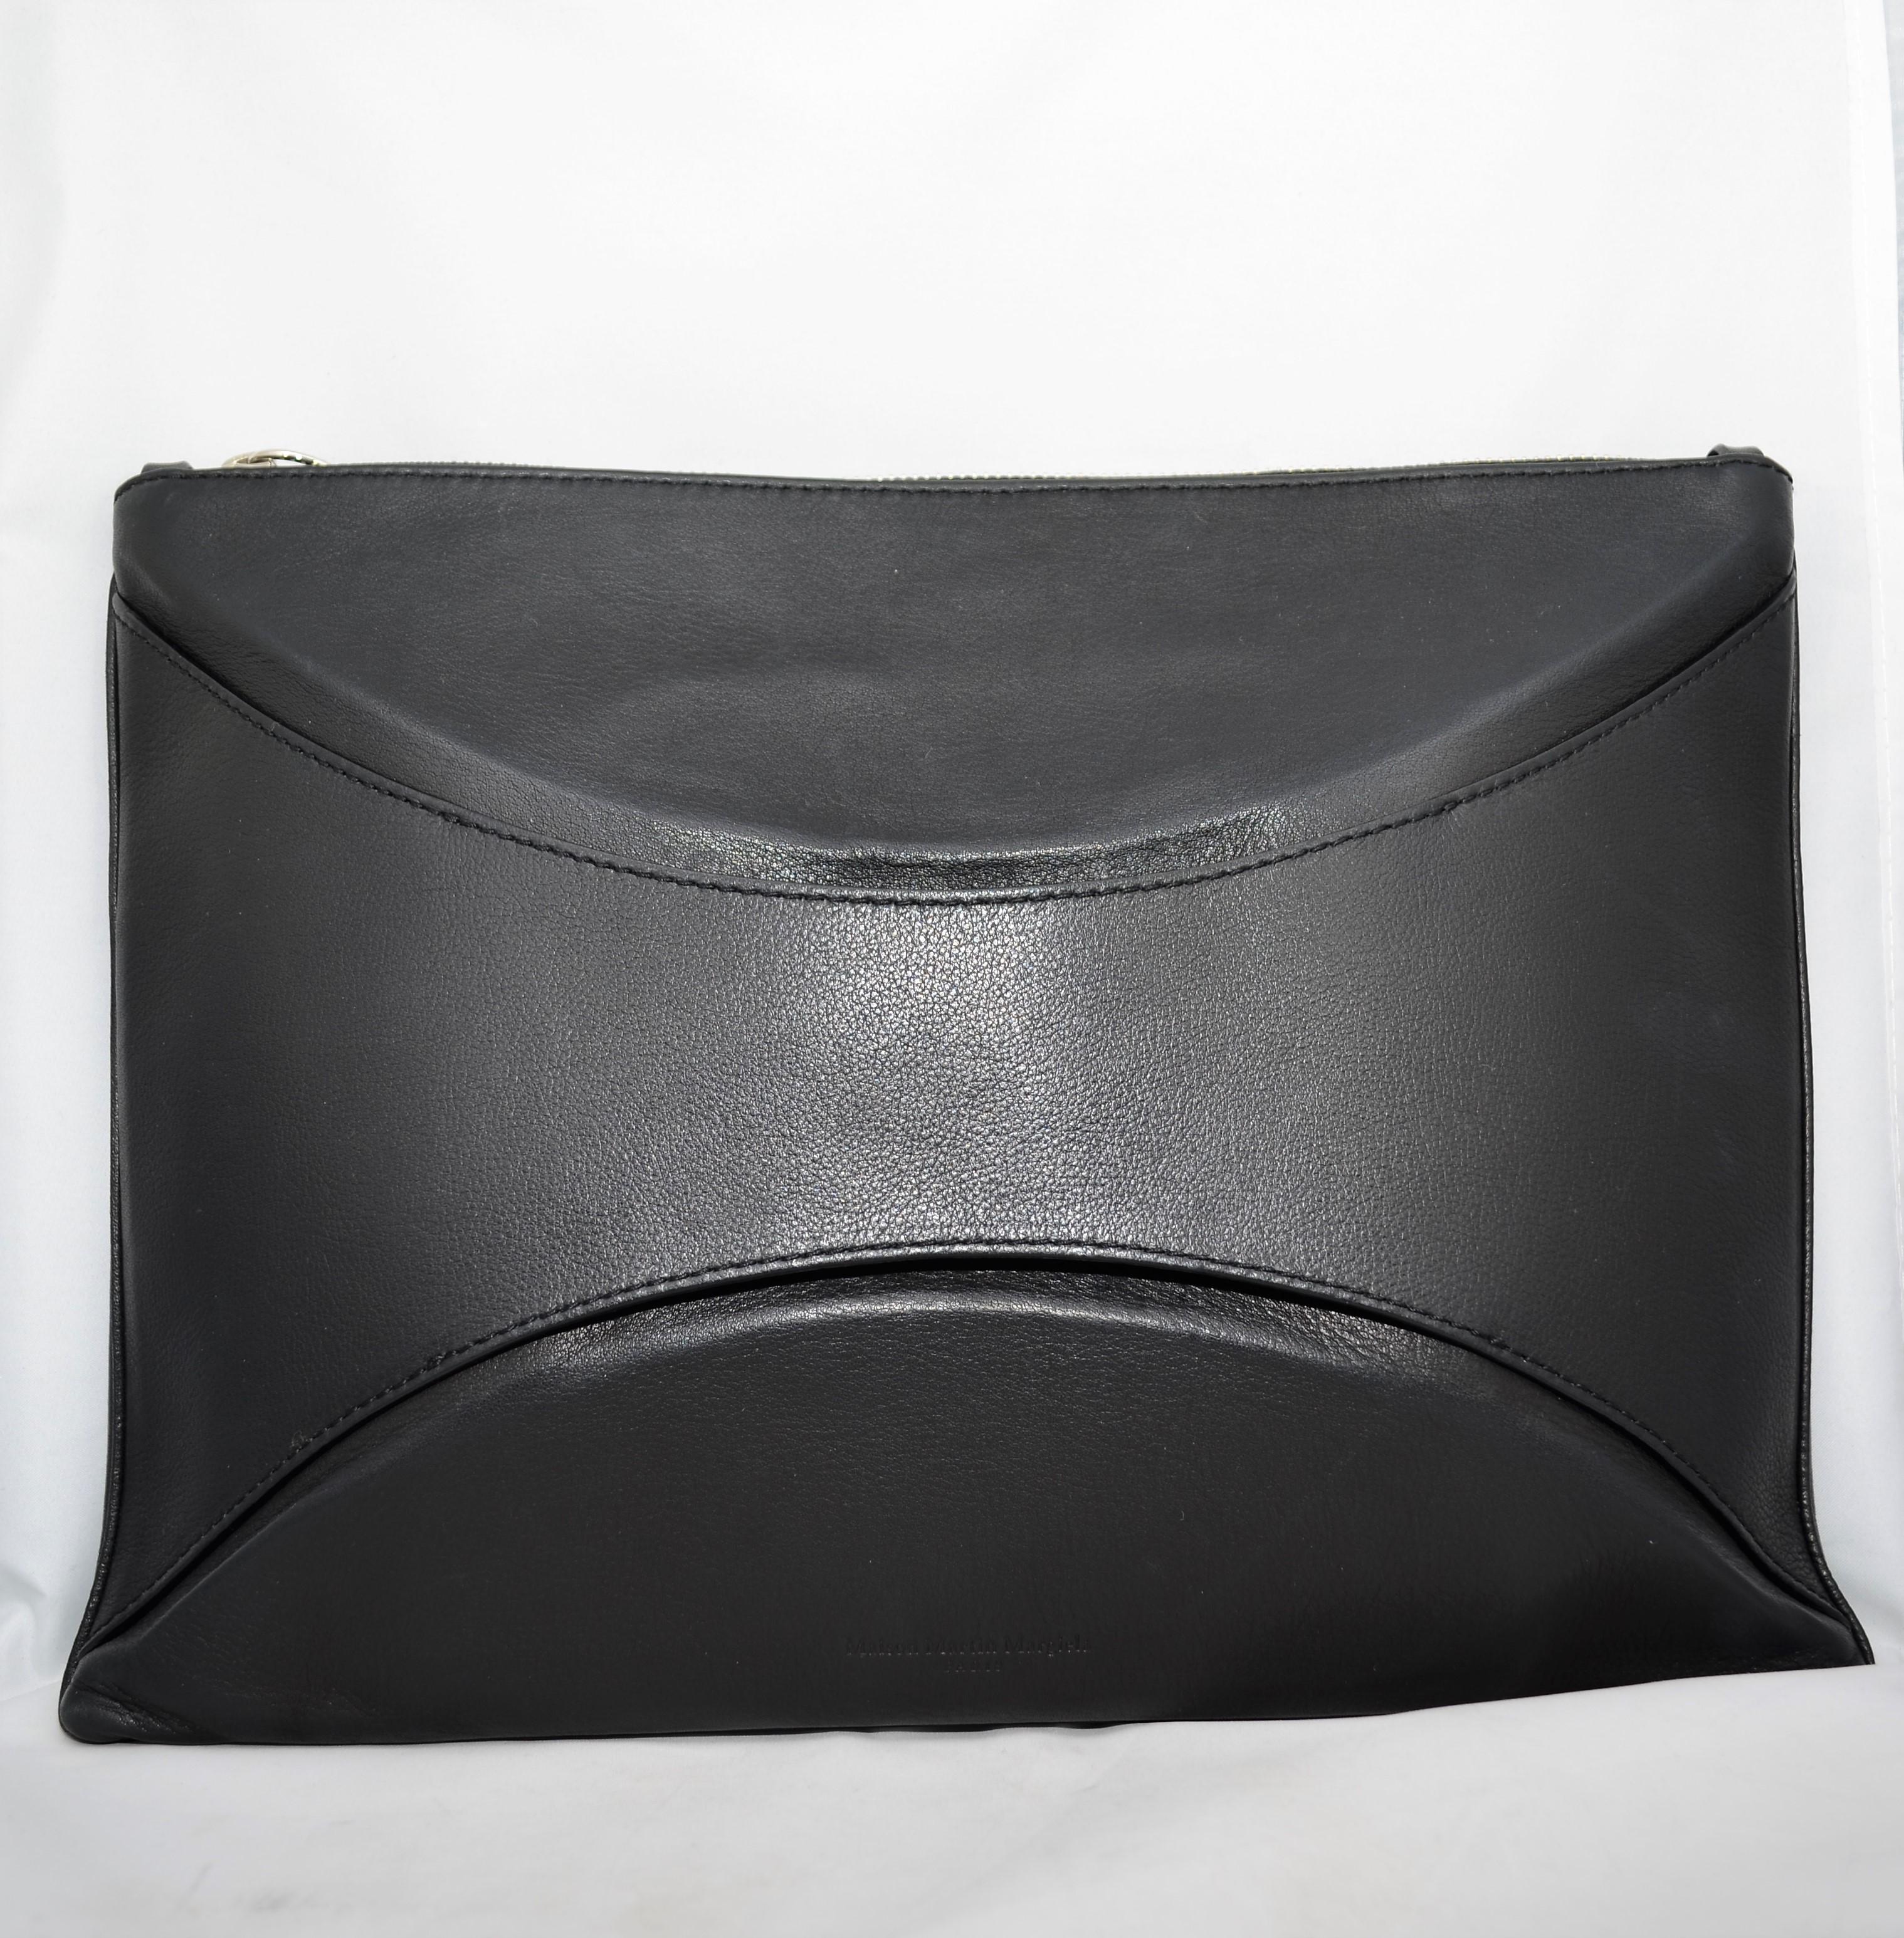 Maison Martin Margiela Clutch featured in black calf leather with silver-tone hardware throughout, a top zipper closure, and suede lining. Clutch has an optional shoulder strap or can be held by the outer leather detail as pictured. Made in